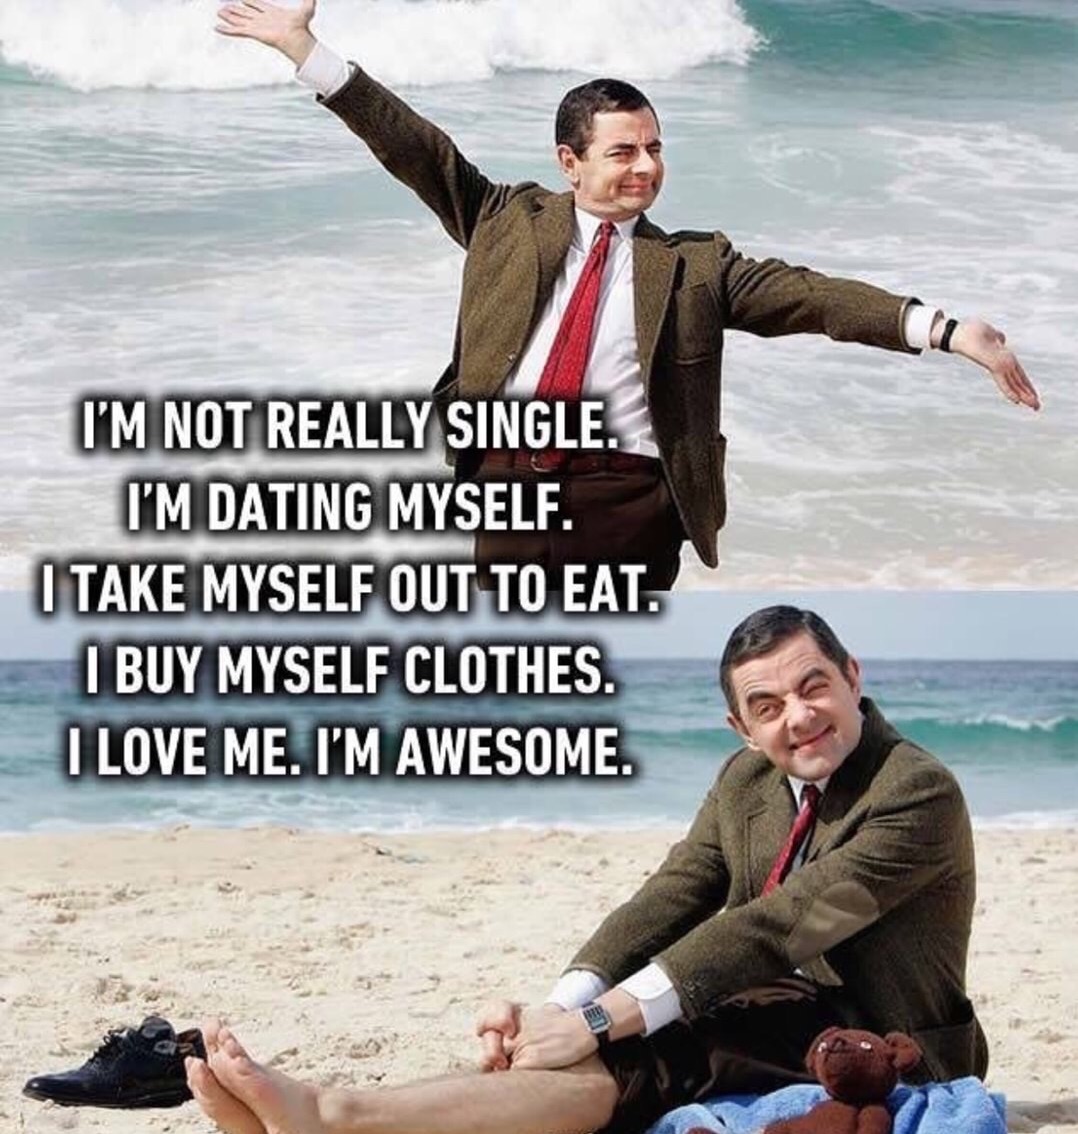 edgy meme of mr bean date myself meme - I'M Not Really Single. I'M Dating Myself. I Take Myself Out To Eat. I Buy Myself Clothes. I Love Me. I'M Awesome.